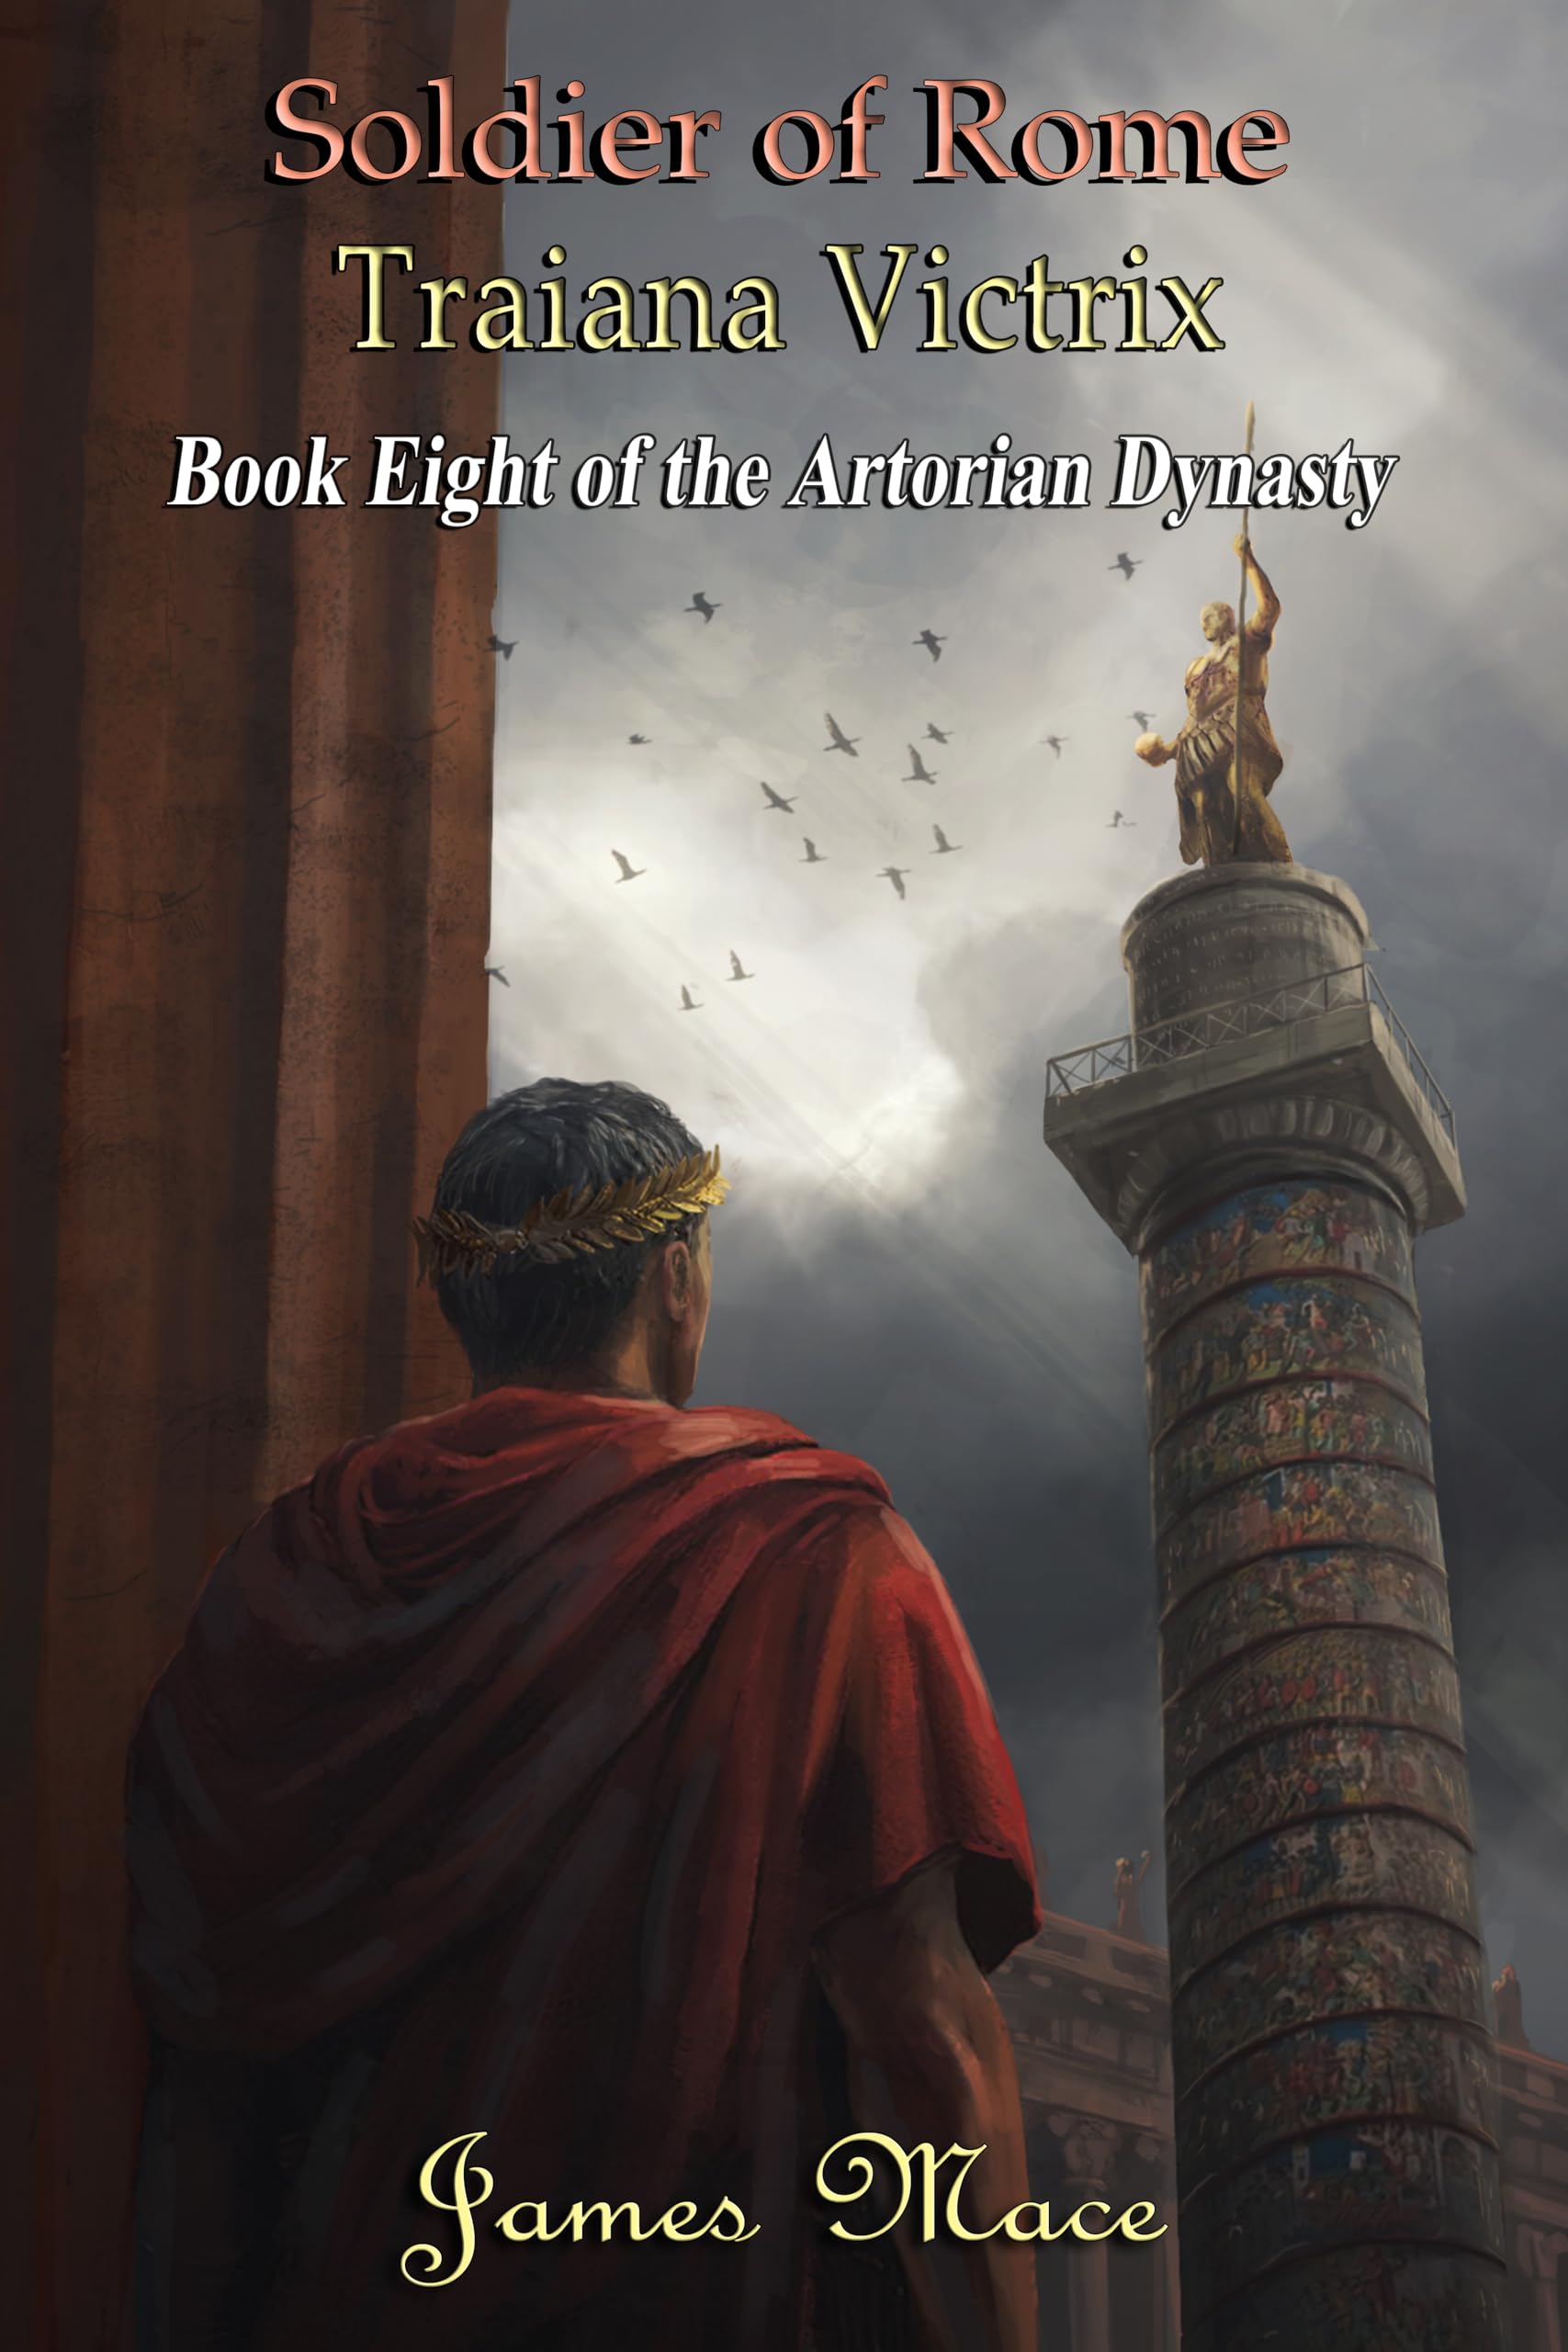 Soldier of Rome: Traiana Victrix (The Artorian Dynasty Book 8)